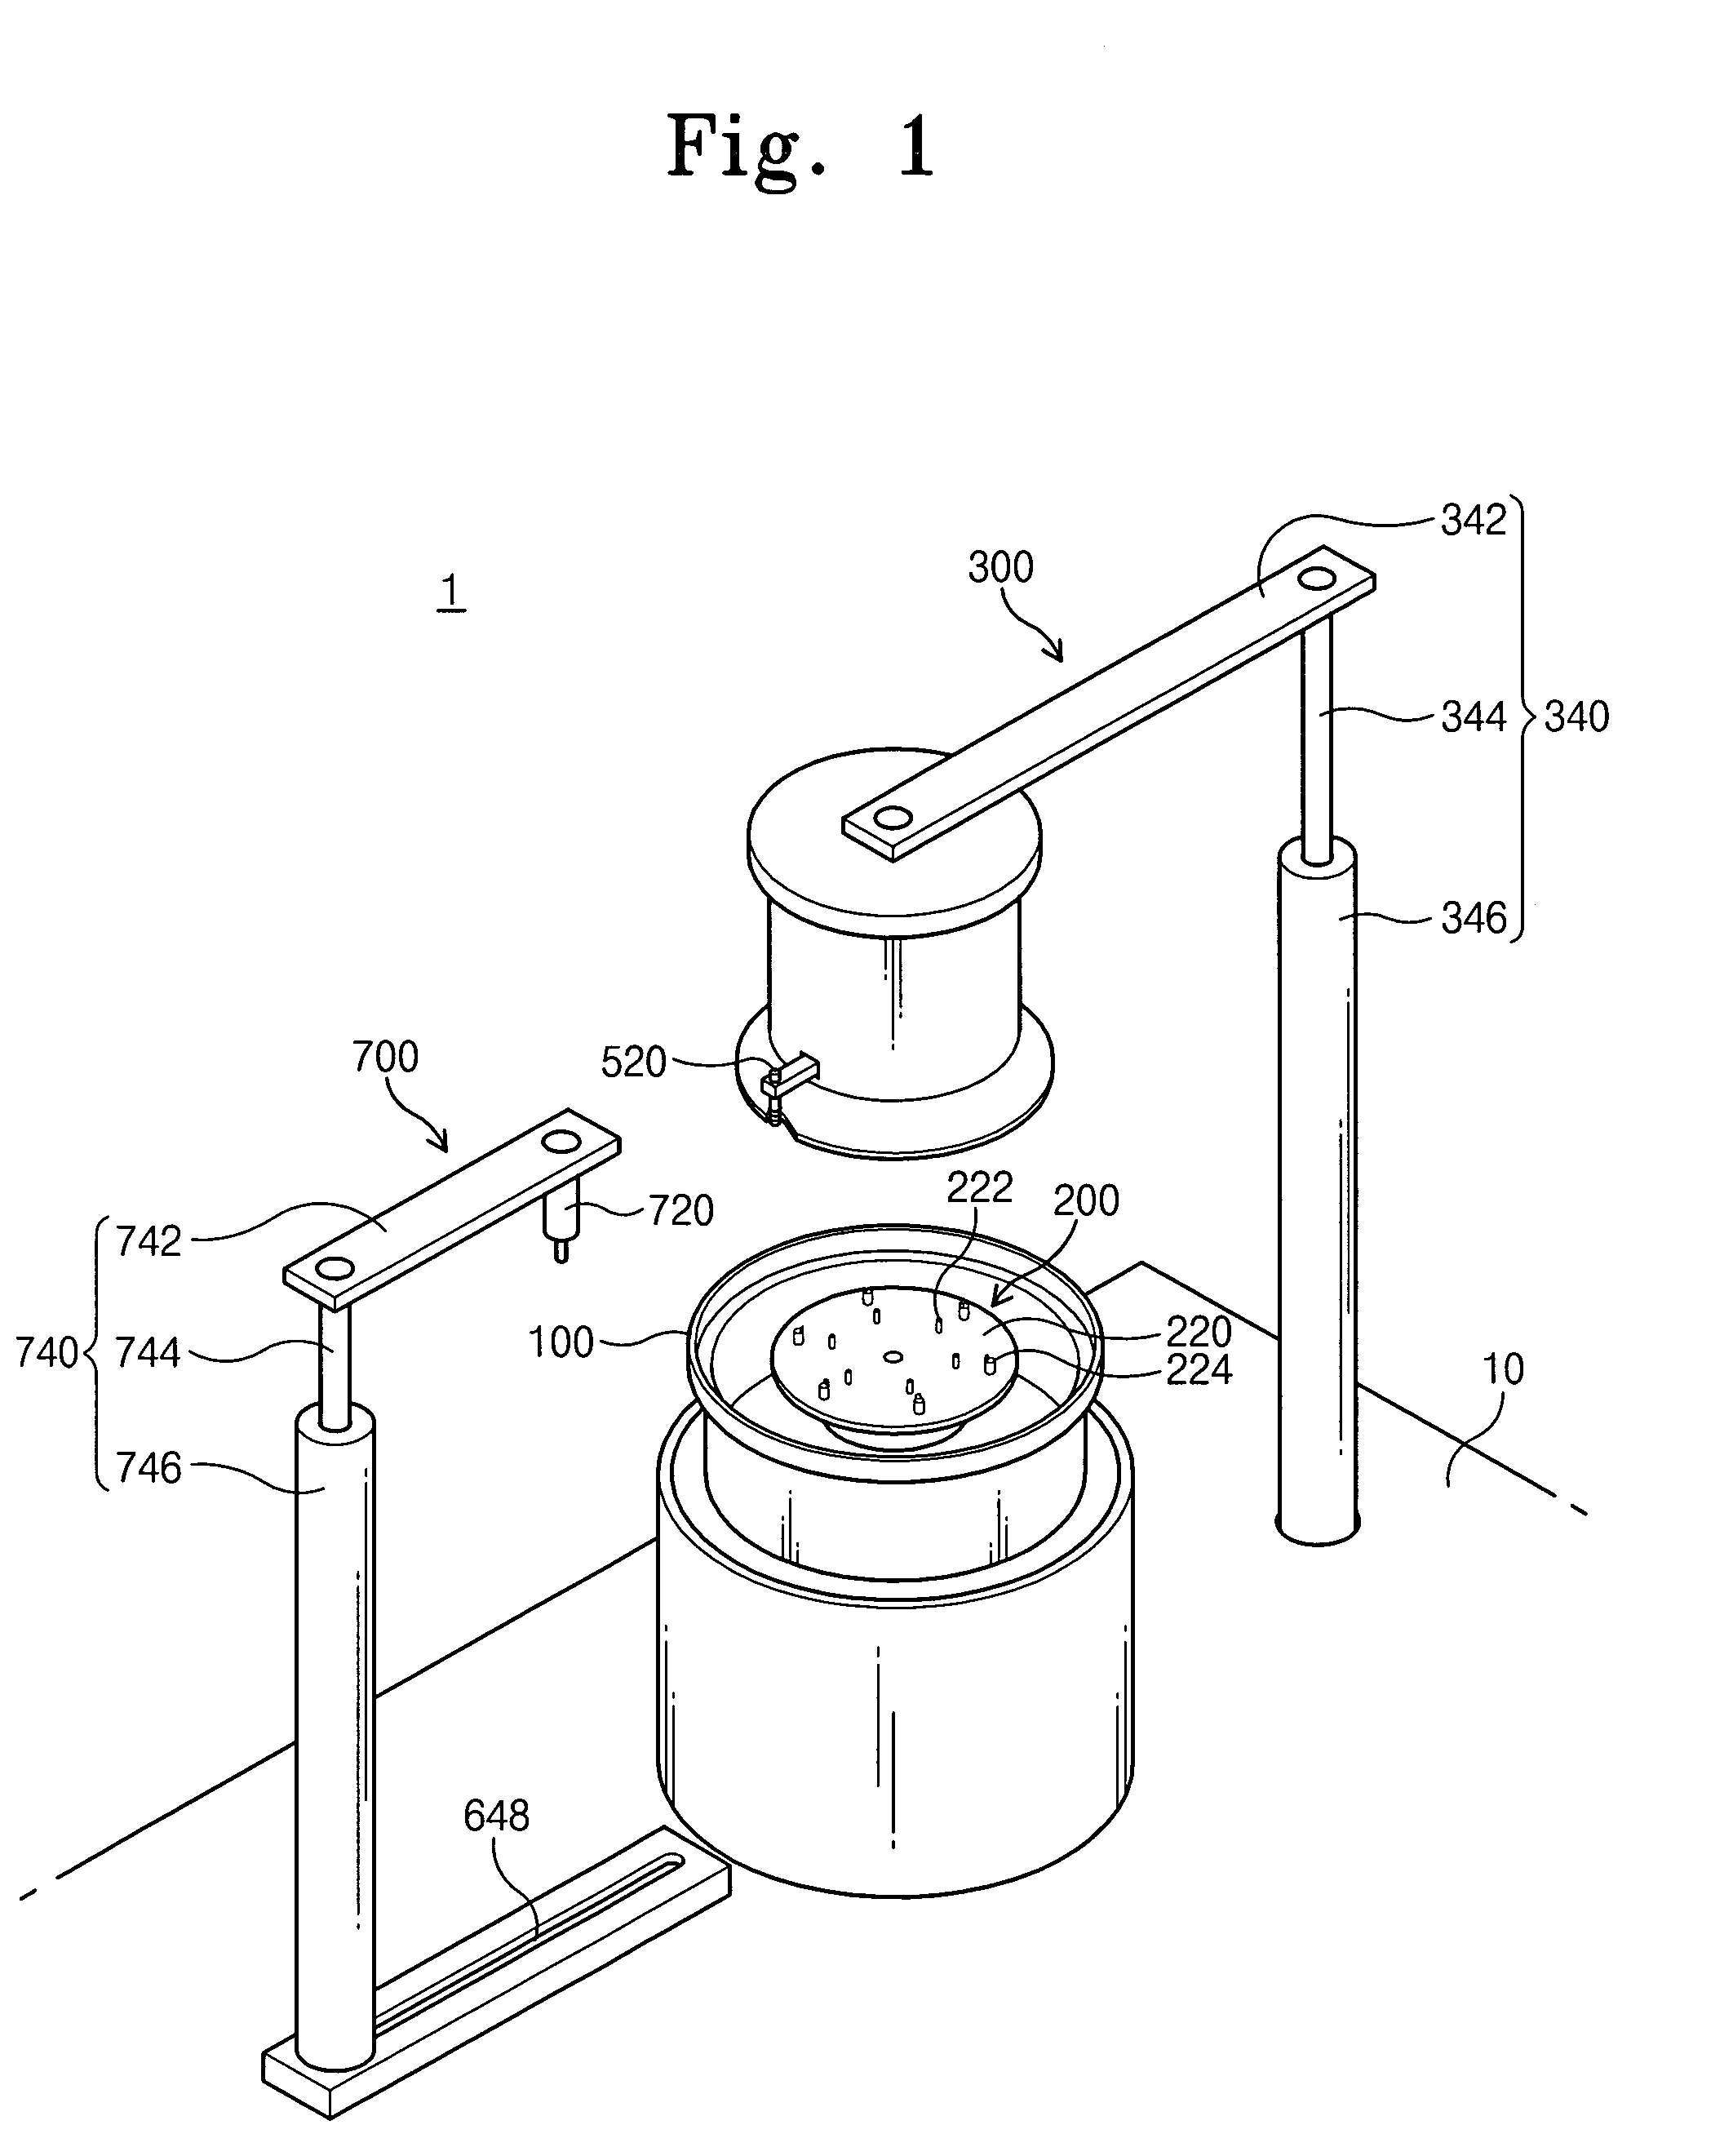 Apparatus for treating substrate